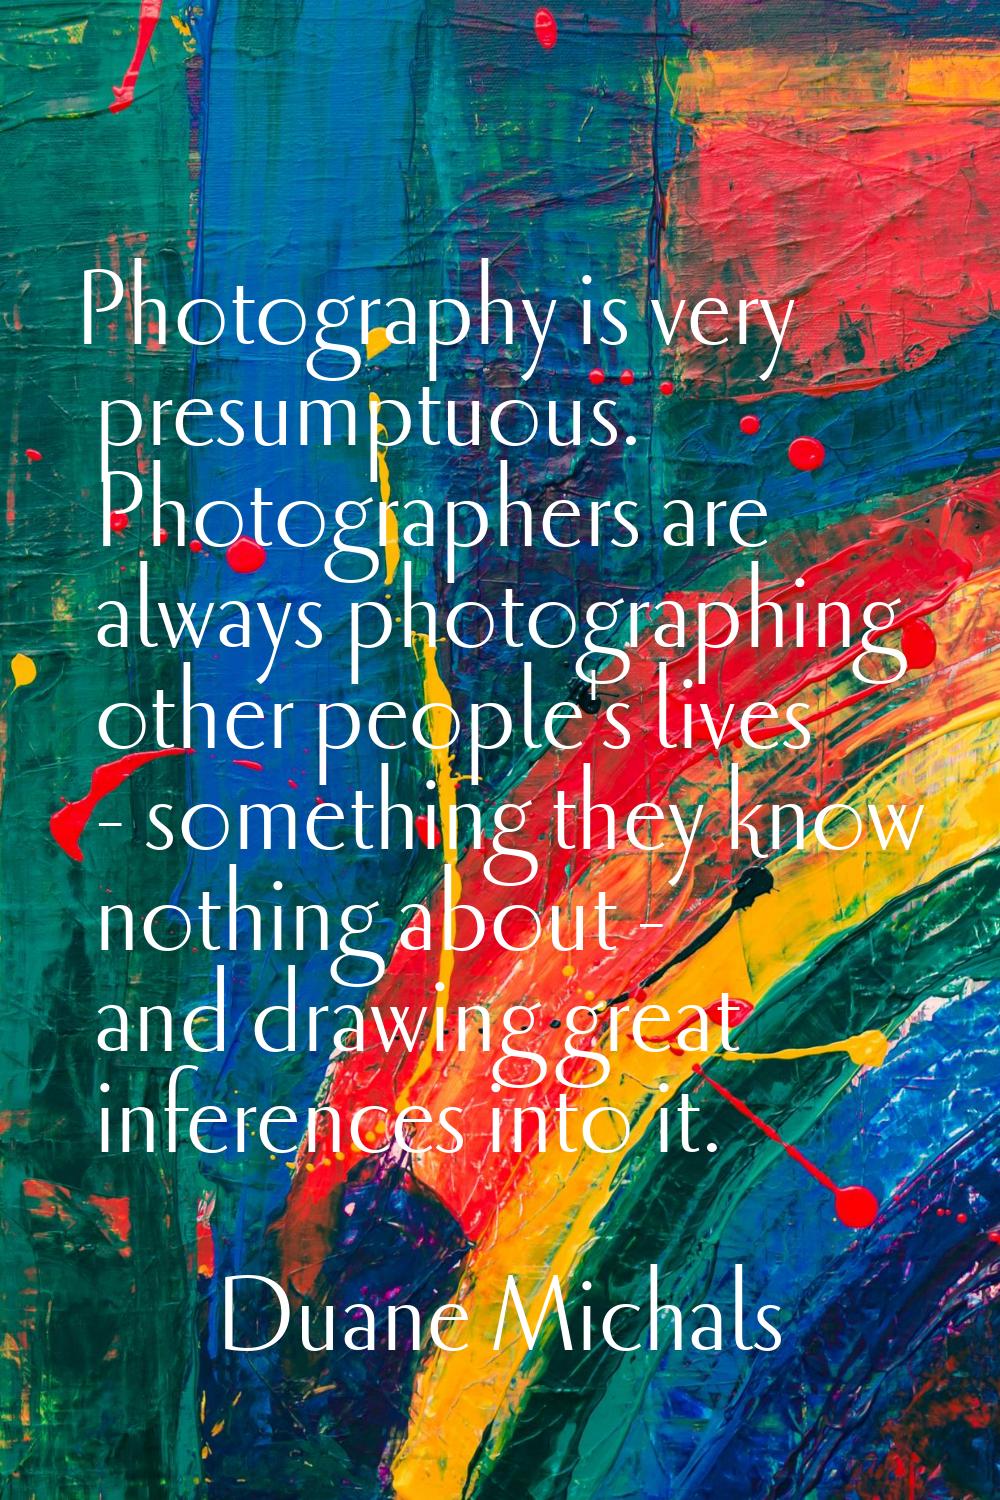 Photography is very presumptuous. Photographers are always photographing other people's lives - som